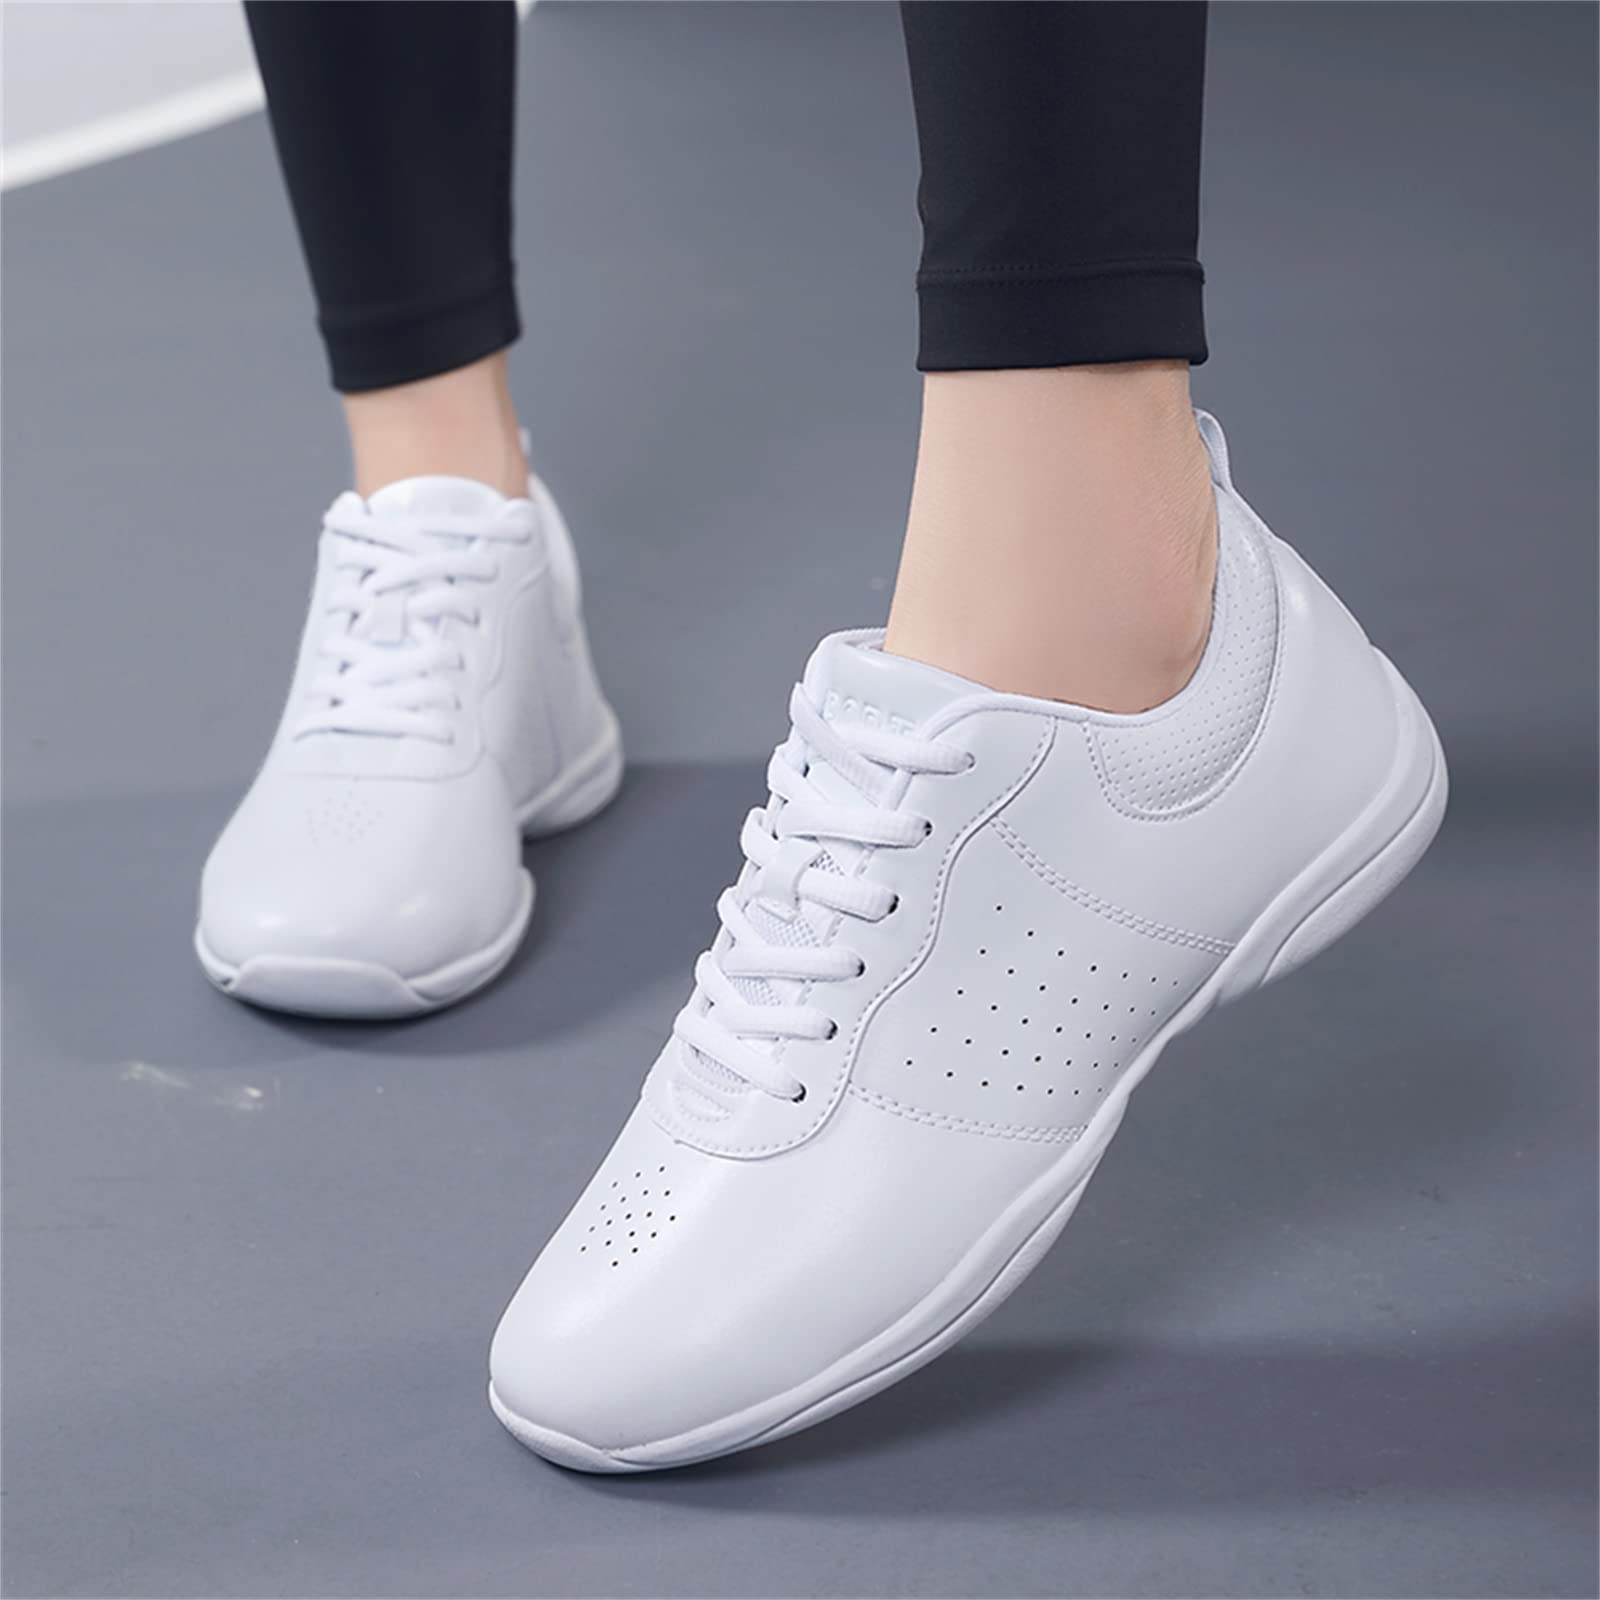 FOFOWHAT Dance Shoes for Women Training Competition Dance Cheer Sneakers Athletic Performance Tennis Walking Shoes White Size 5.5 Female